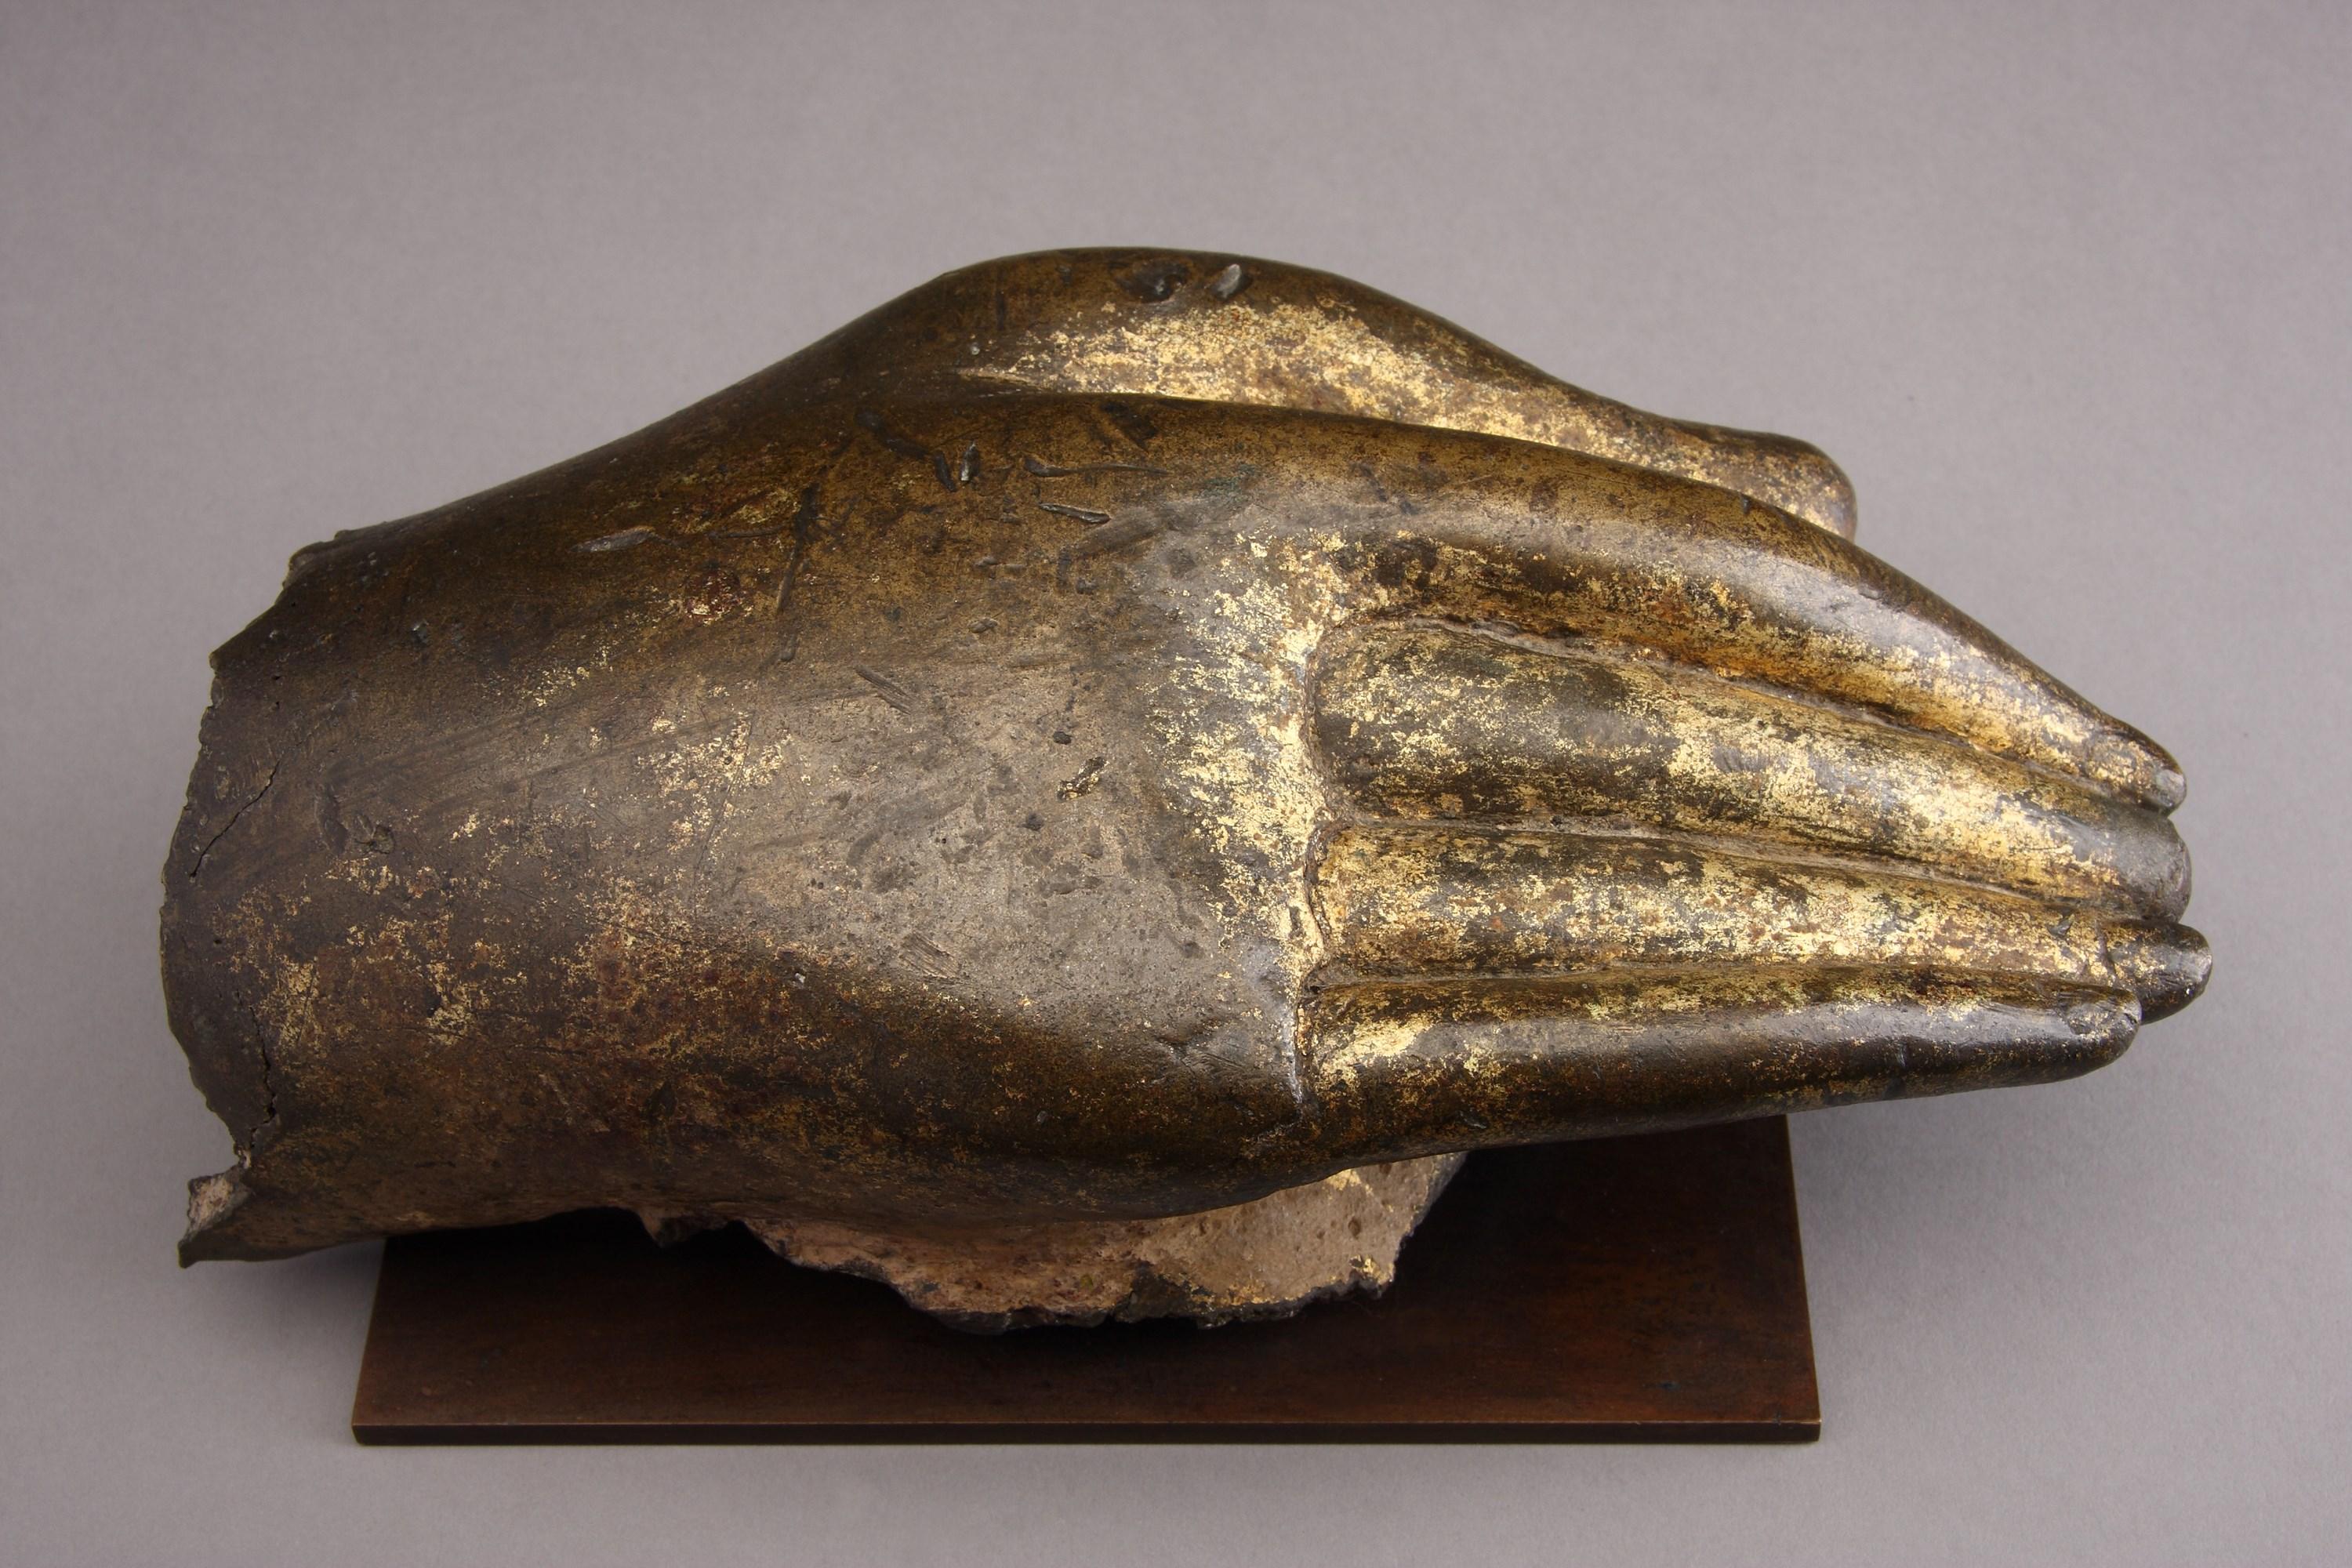 A Heavy Cast Gilded Bronze Right Hand of the Buddha Shakyamuni 
Showing the gesture of meditation
Old smooth dark patina with remains of gilding
China
15th Century - Early Ming Dynasty (1368 - 1644)

SIZE: 25cm long, 13.5cm wide, 10cm deep – 9¾ ins